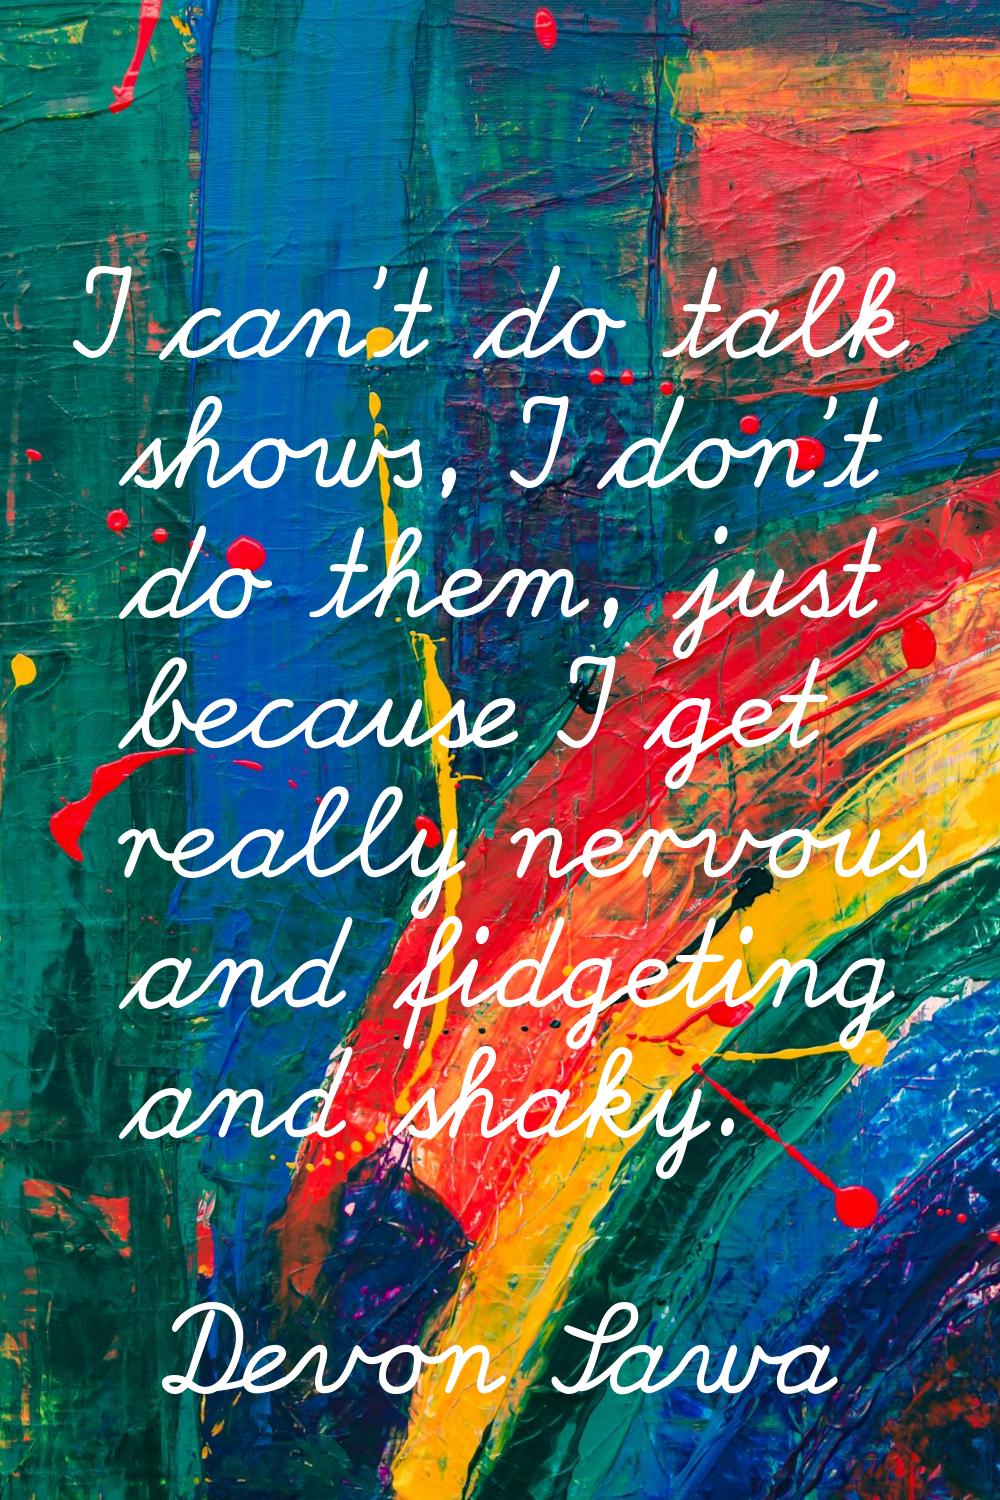 I can't do talk shows, I don't do them, just because I get really nervous and fidgeting and shaky.